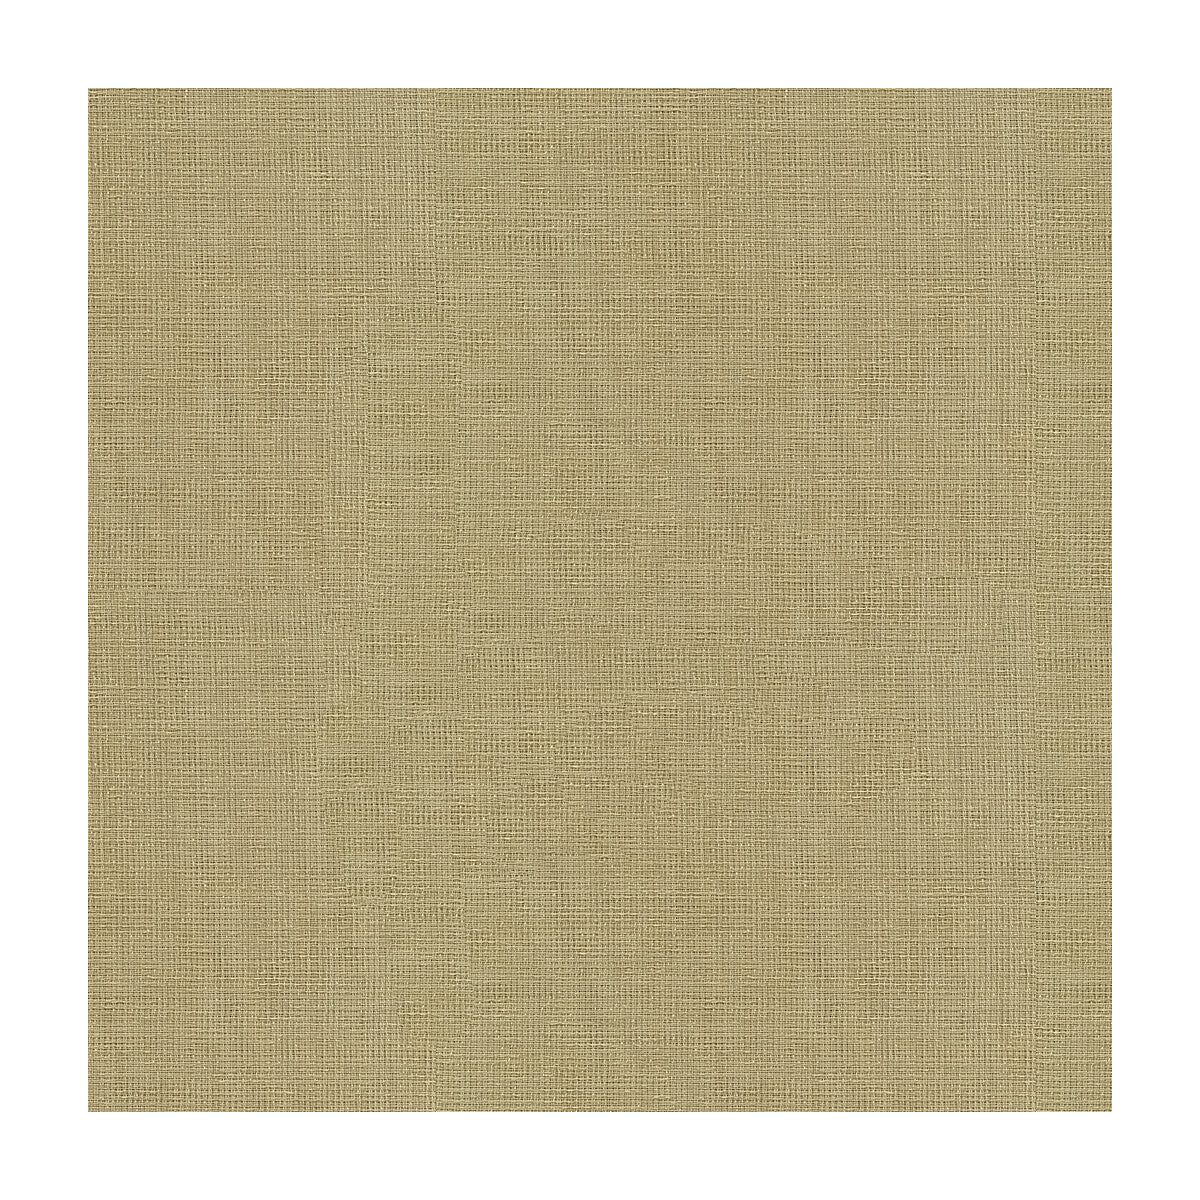 Kravet Contract fabric in 4164-16 color - pattern 4164.16.0 - by Kravet Contract